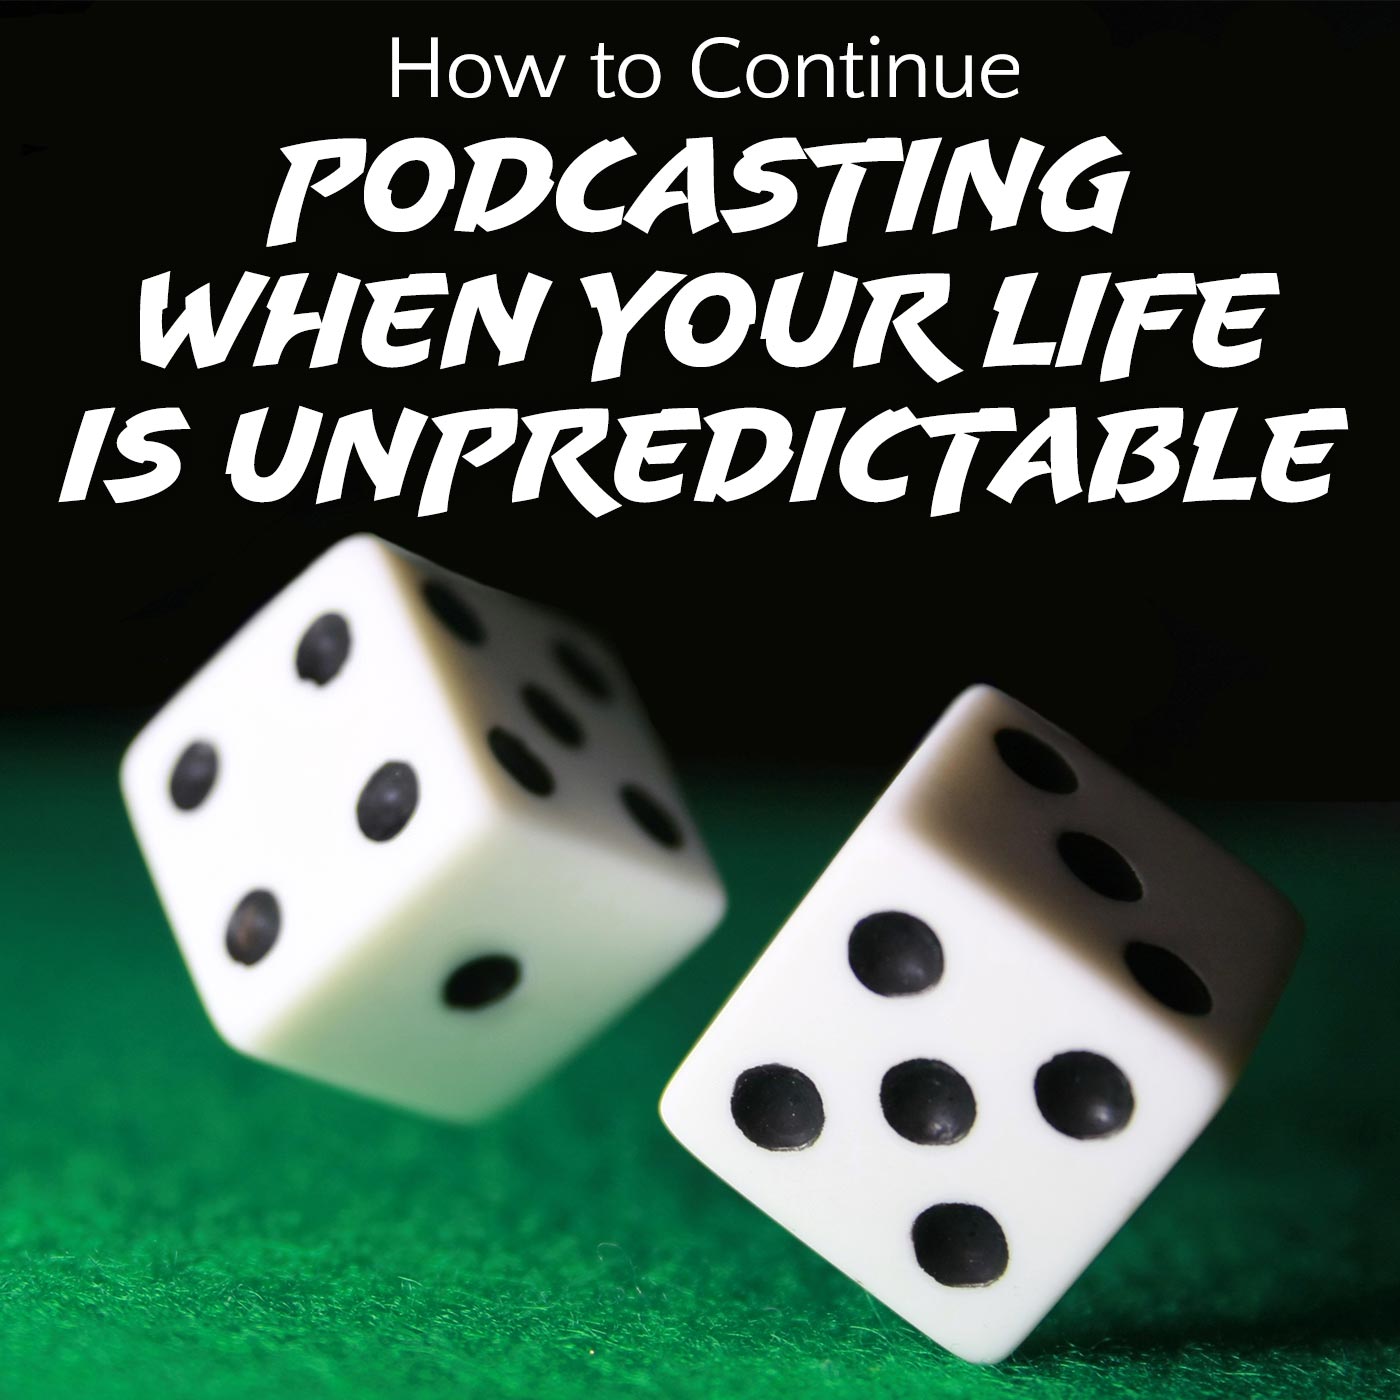 How to Continue Podcasting When Your Life Is Unpredictable